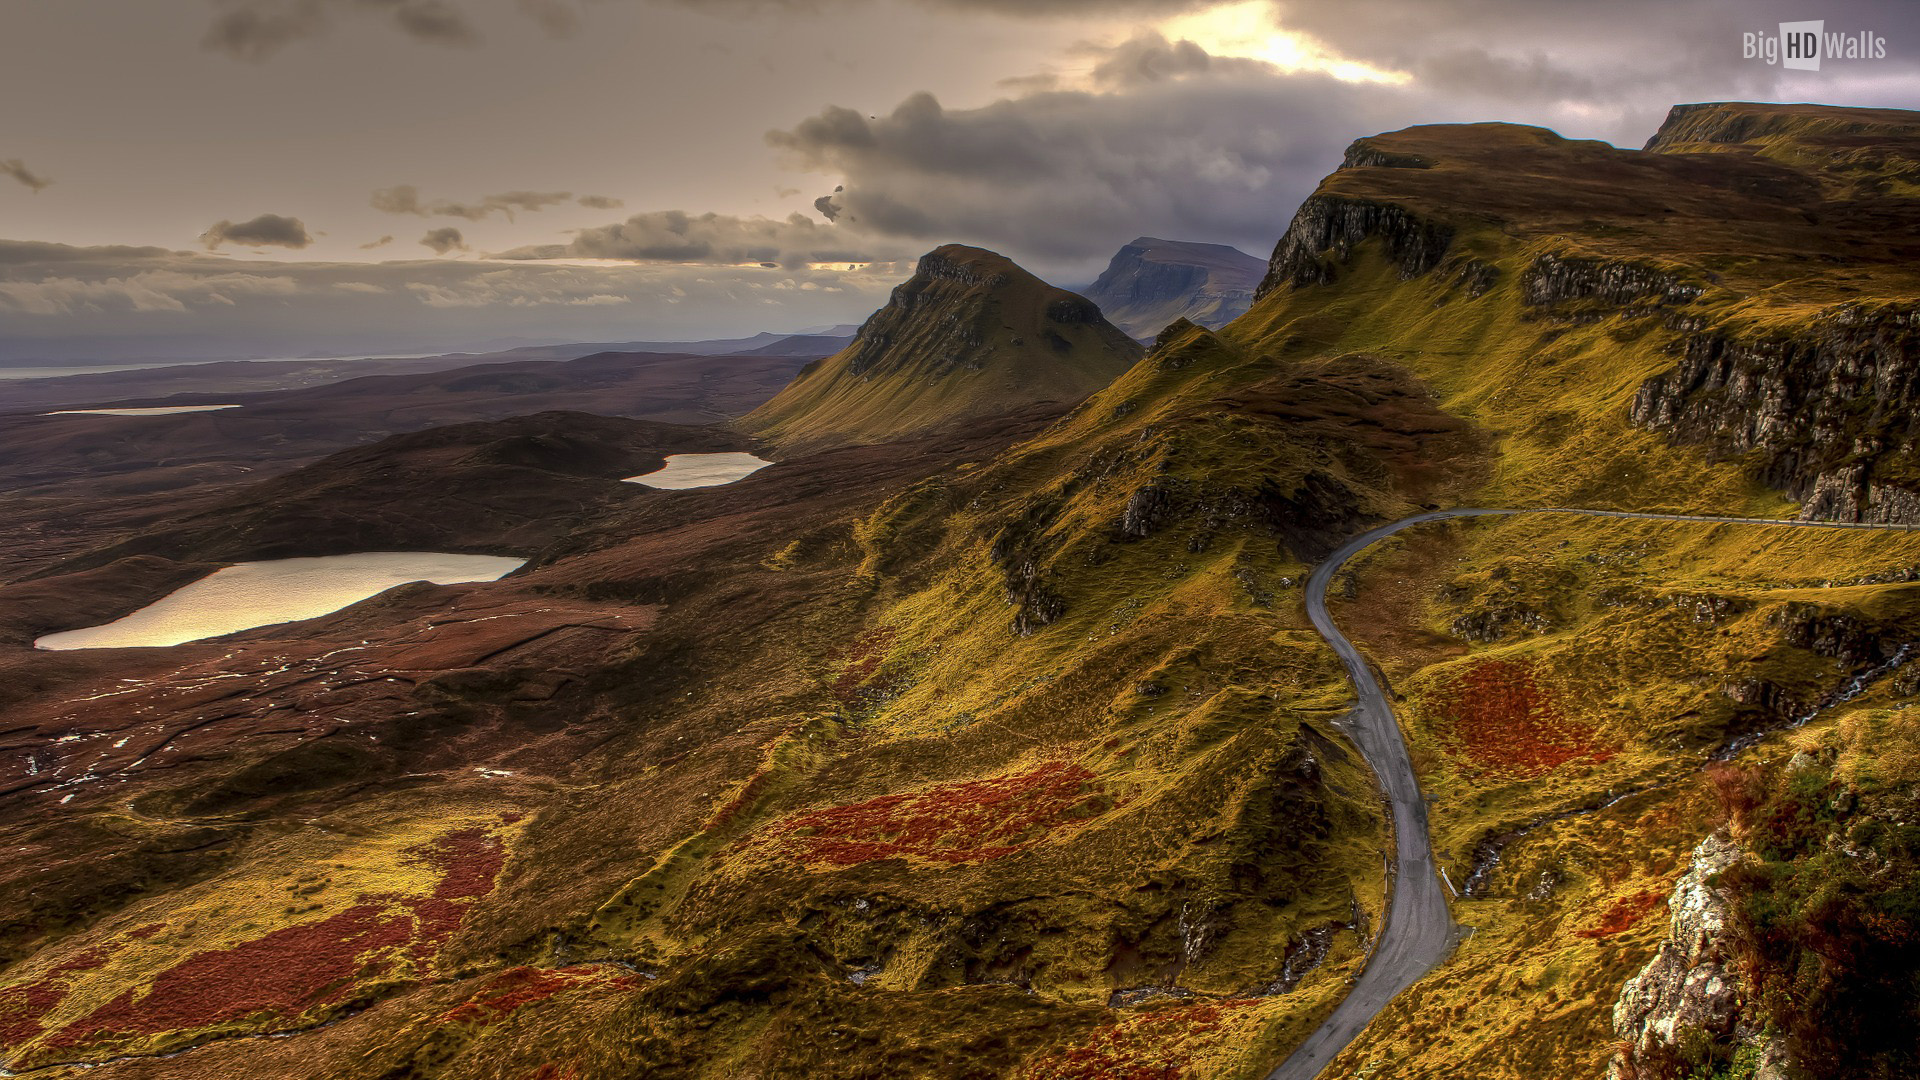 Awesome Landscape Pictures From Scotland BigHDwalls